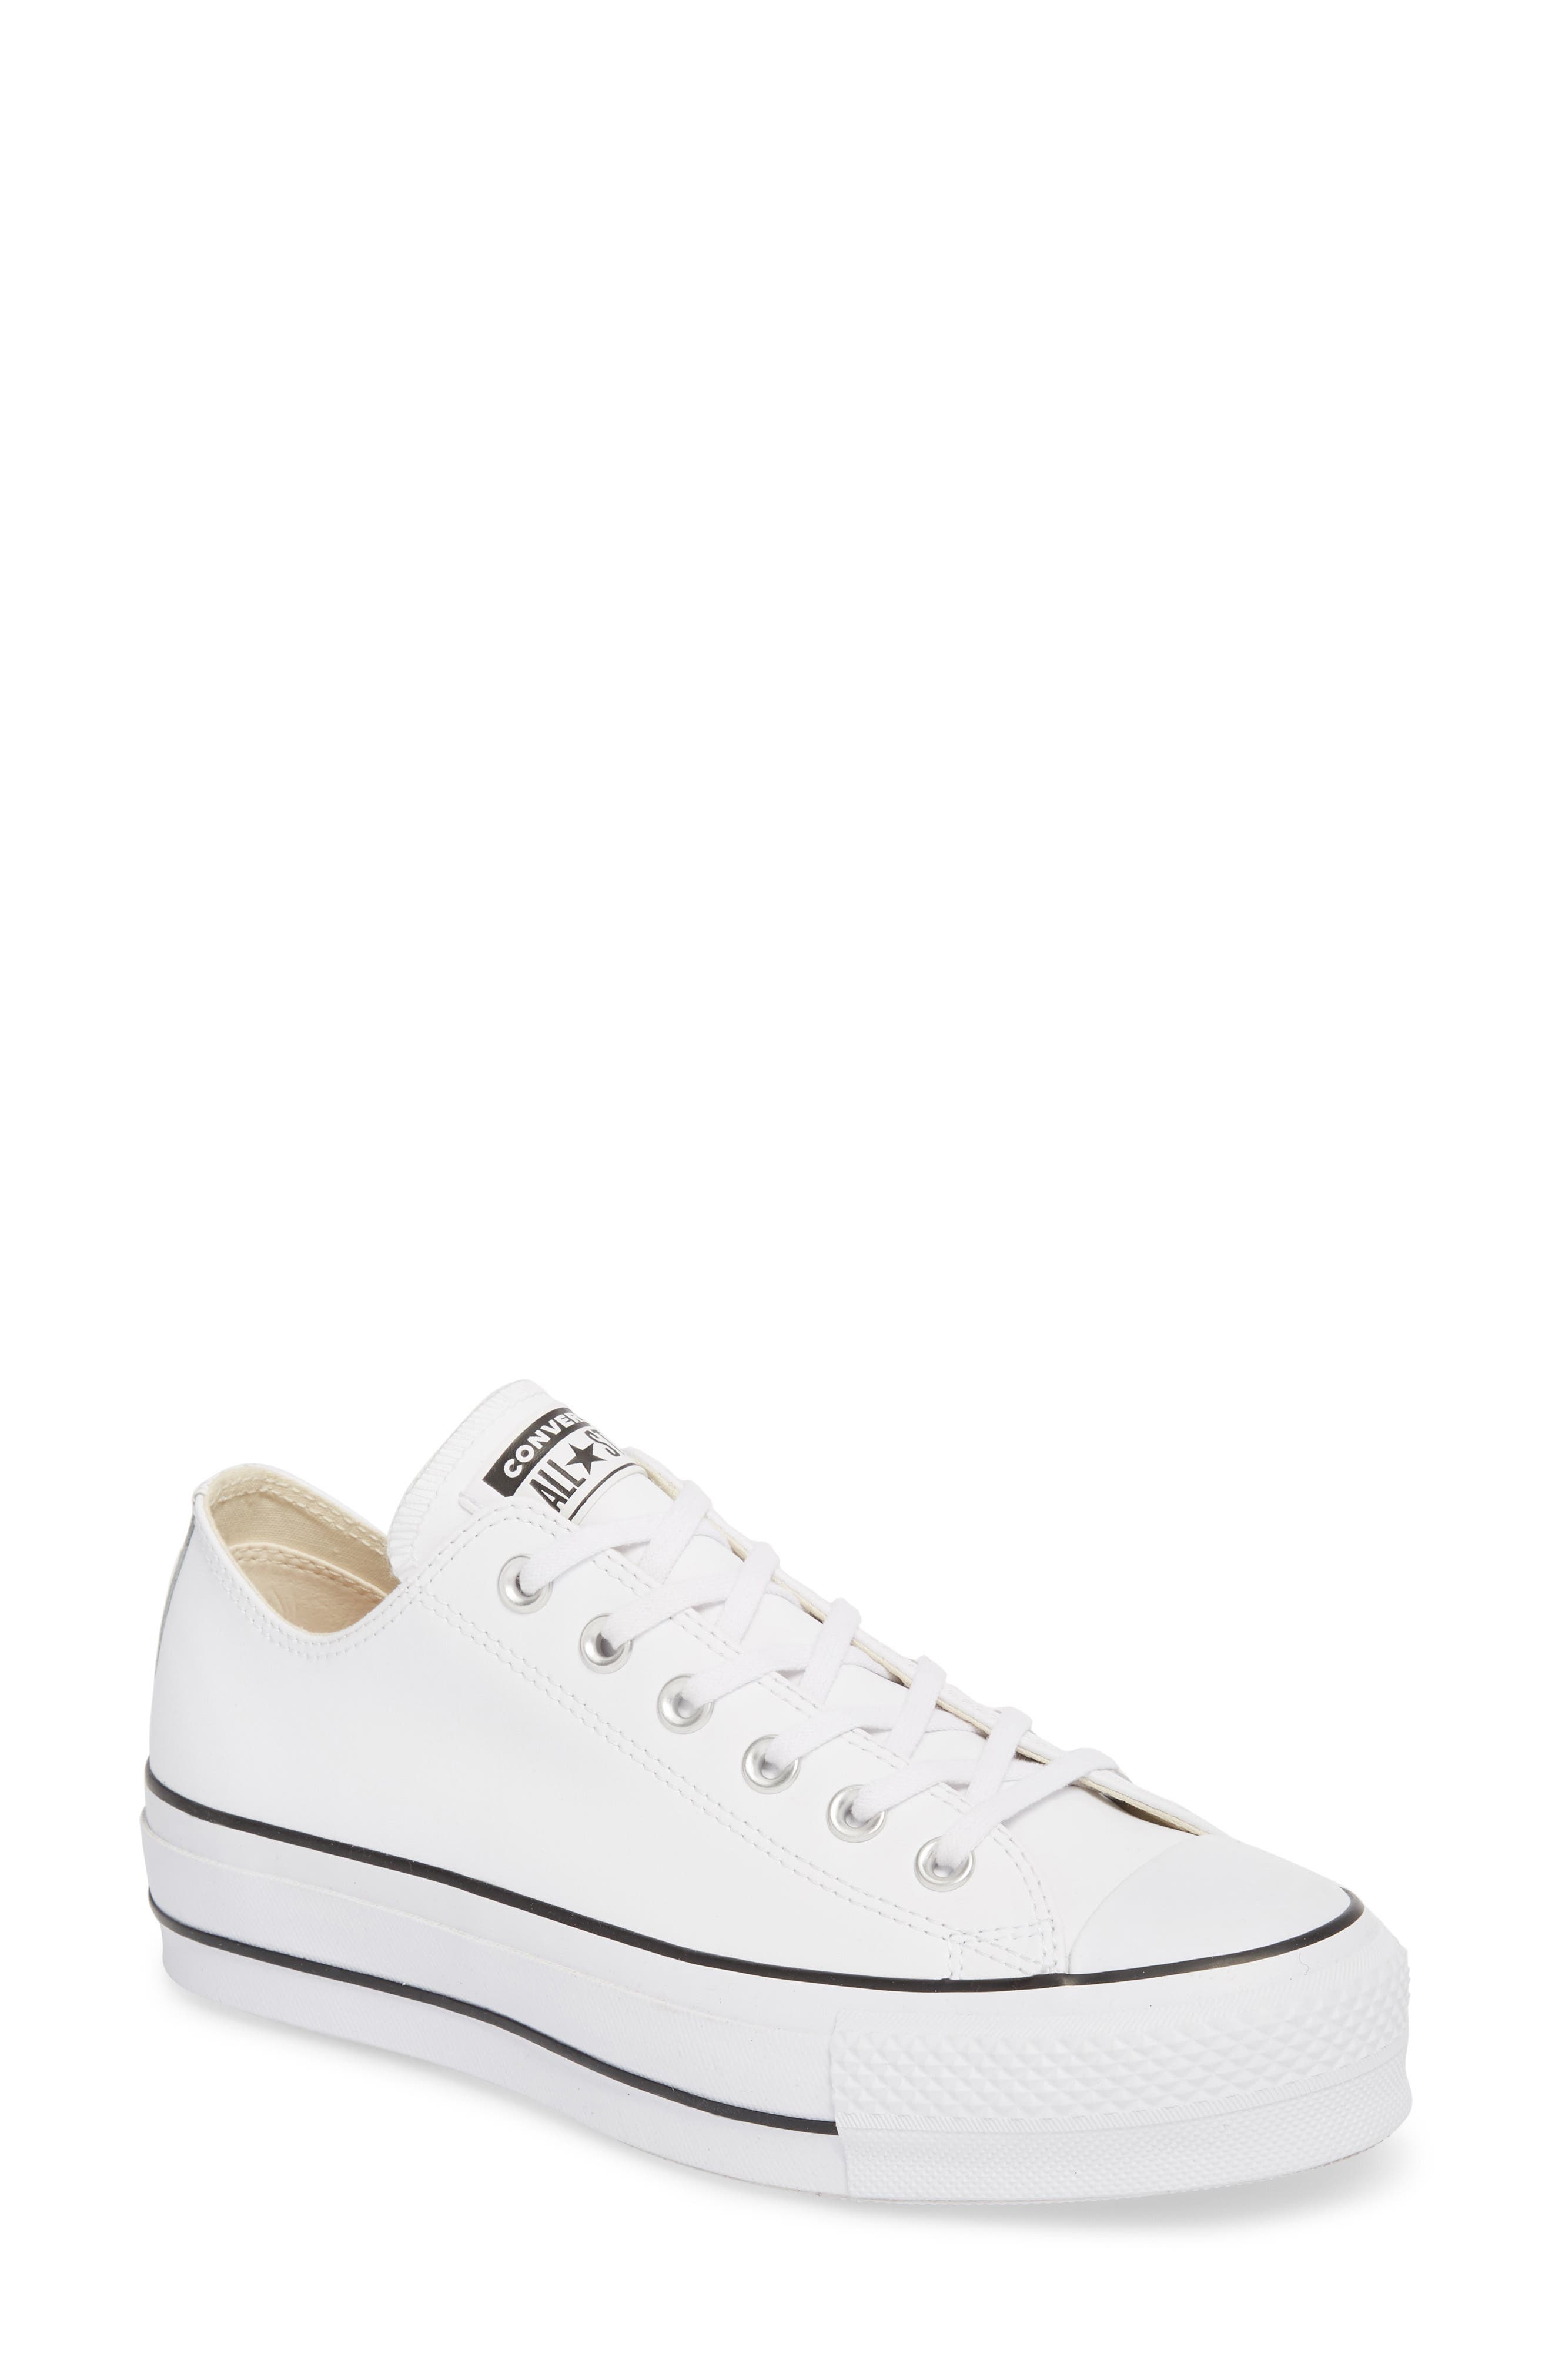 patent leather converse nordstrom